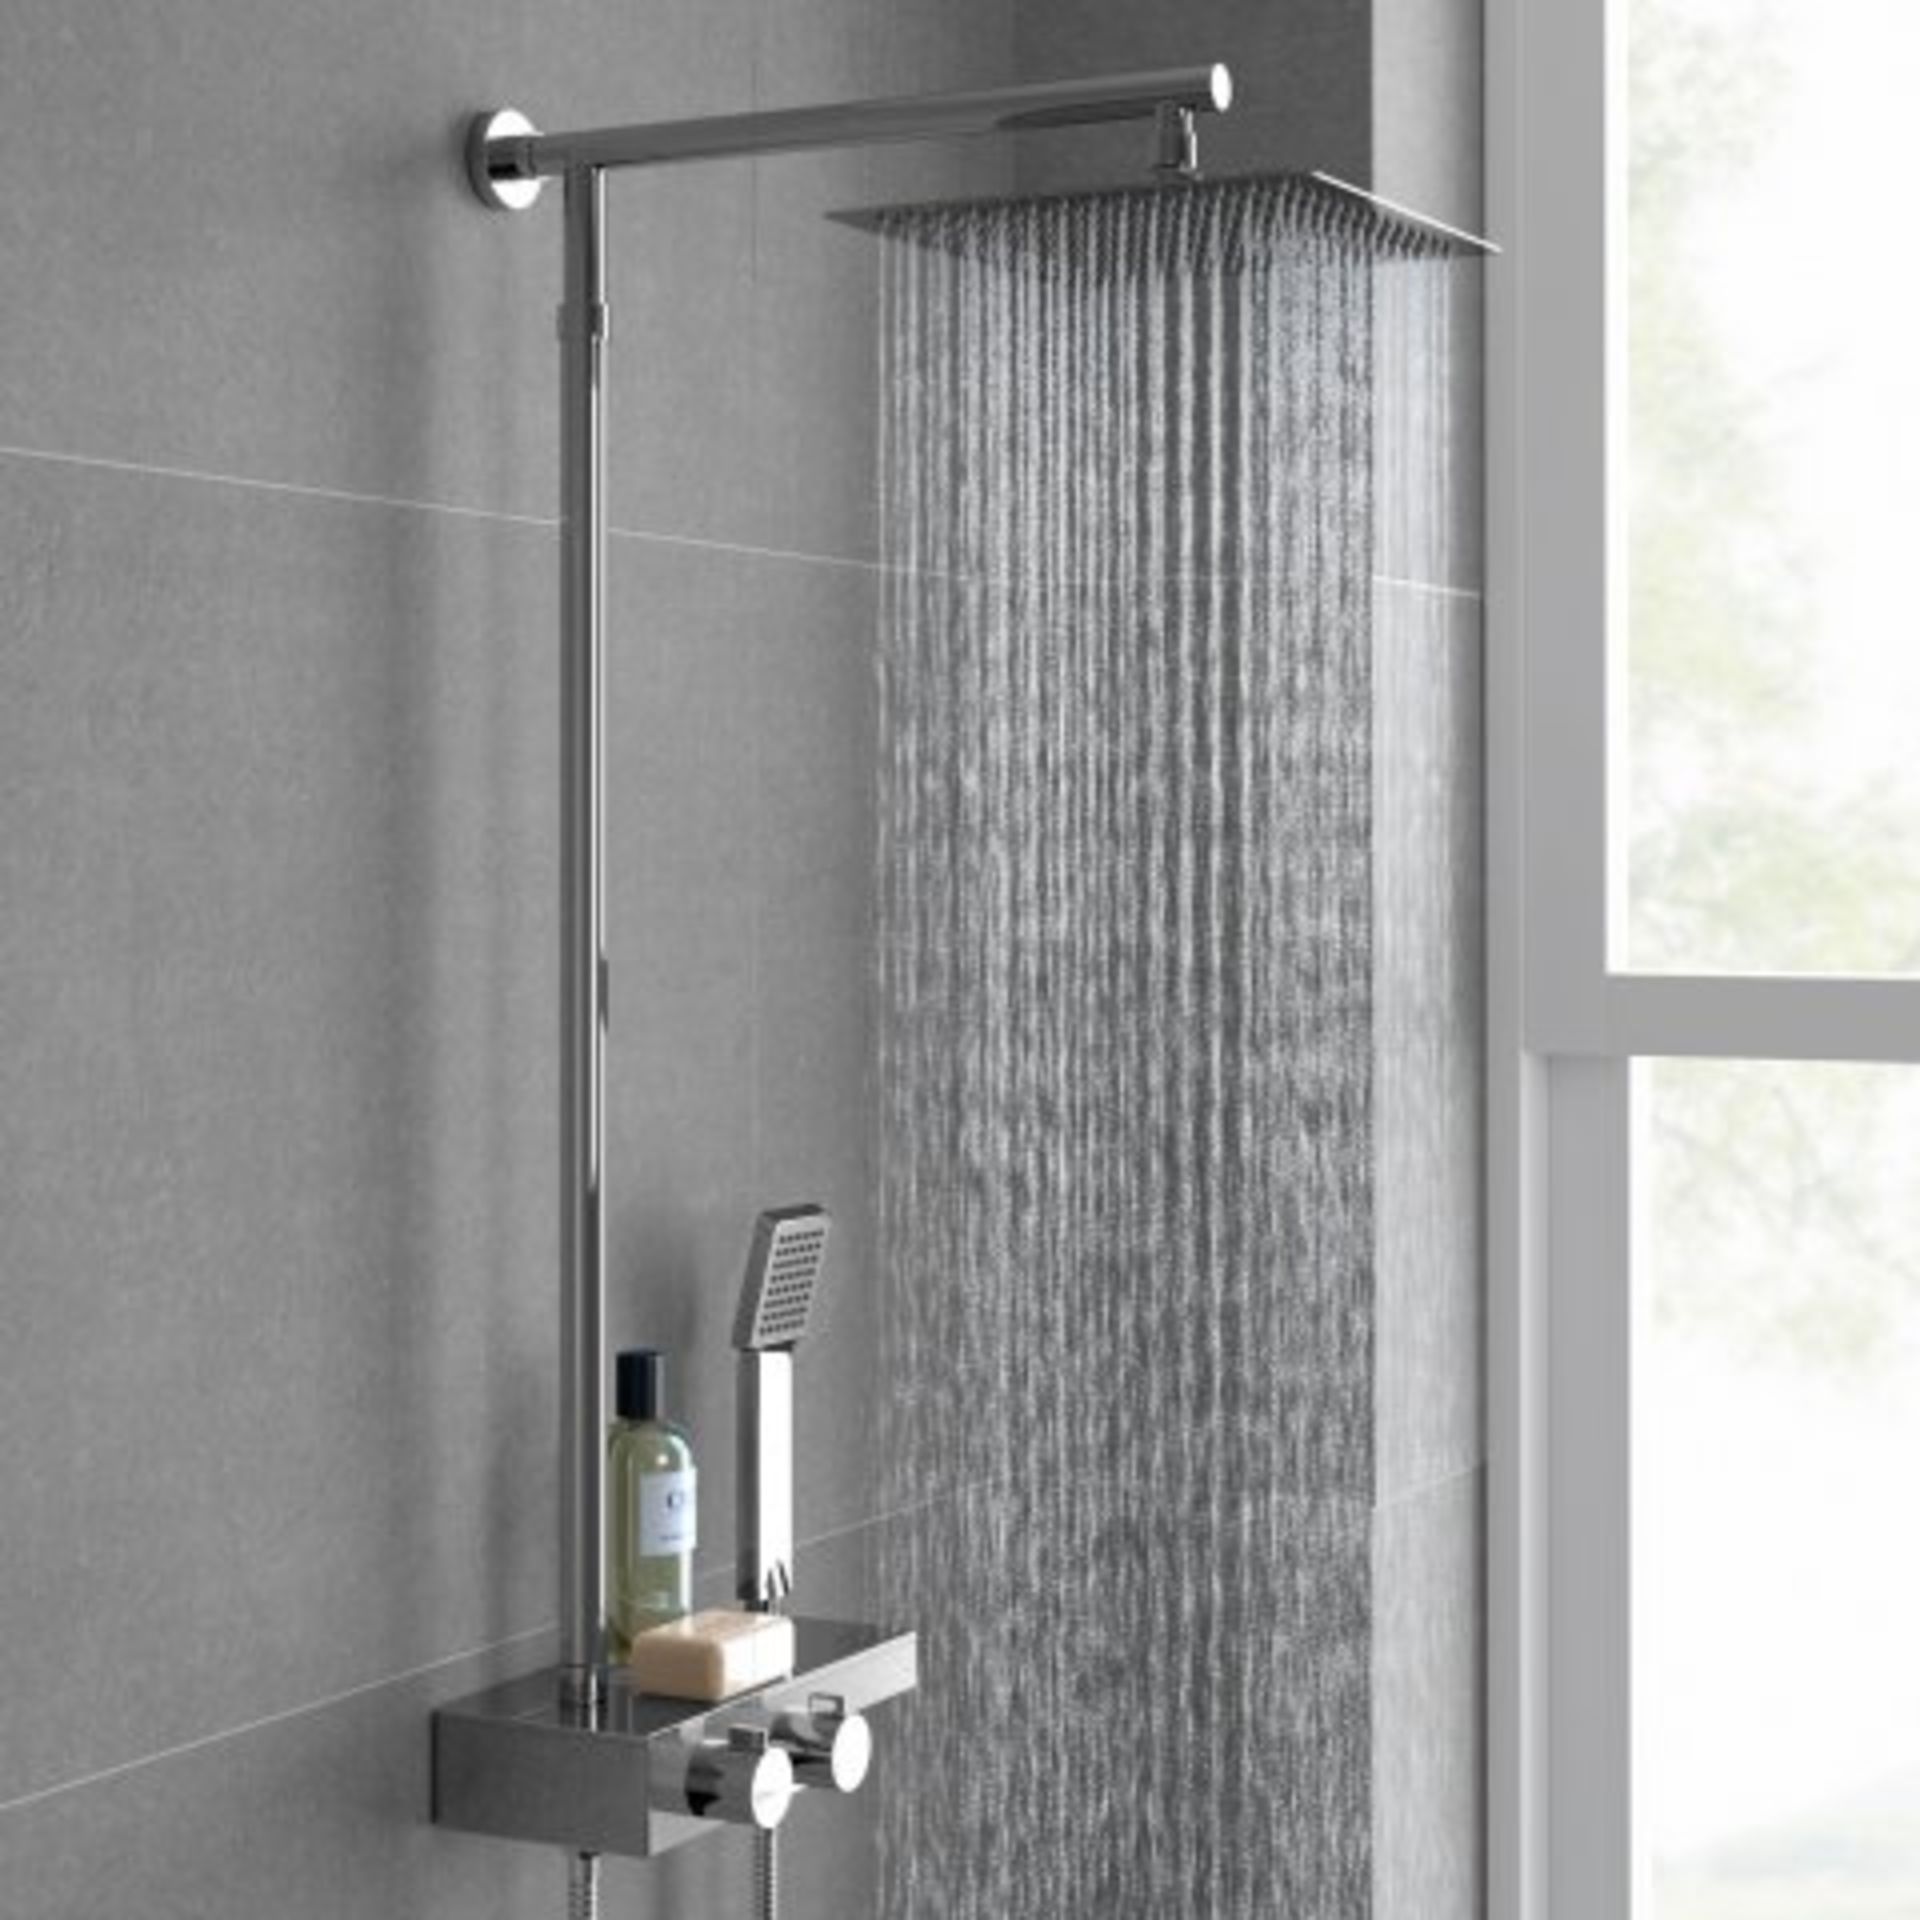 (N61) 250mm Large Square Head Thermostatic Exposed Shower Kit, Handheld & Storage Shelf. RRP £349.